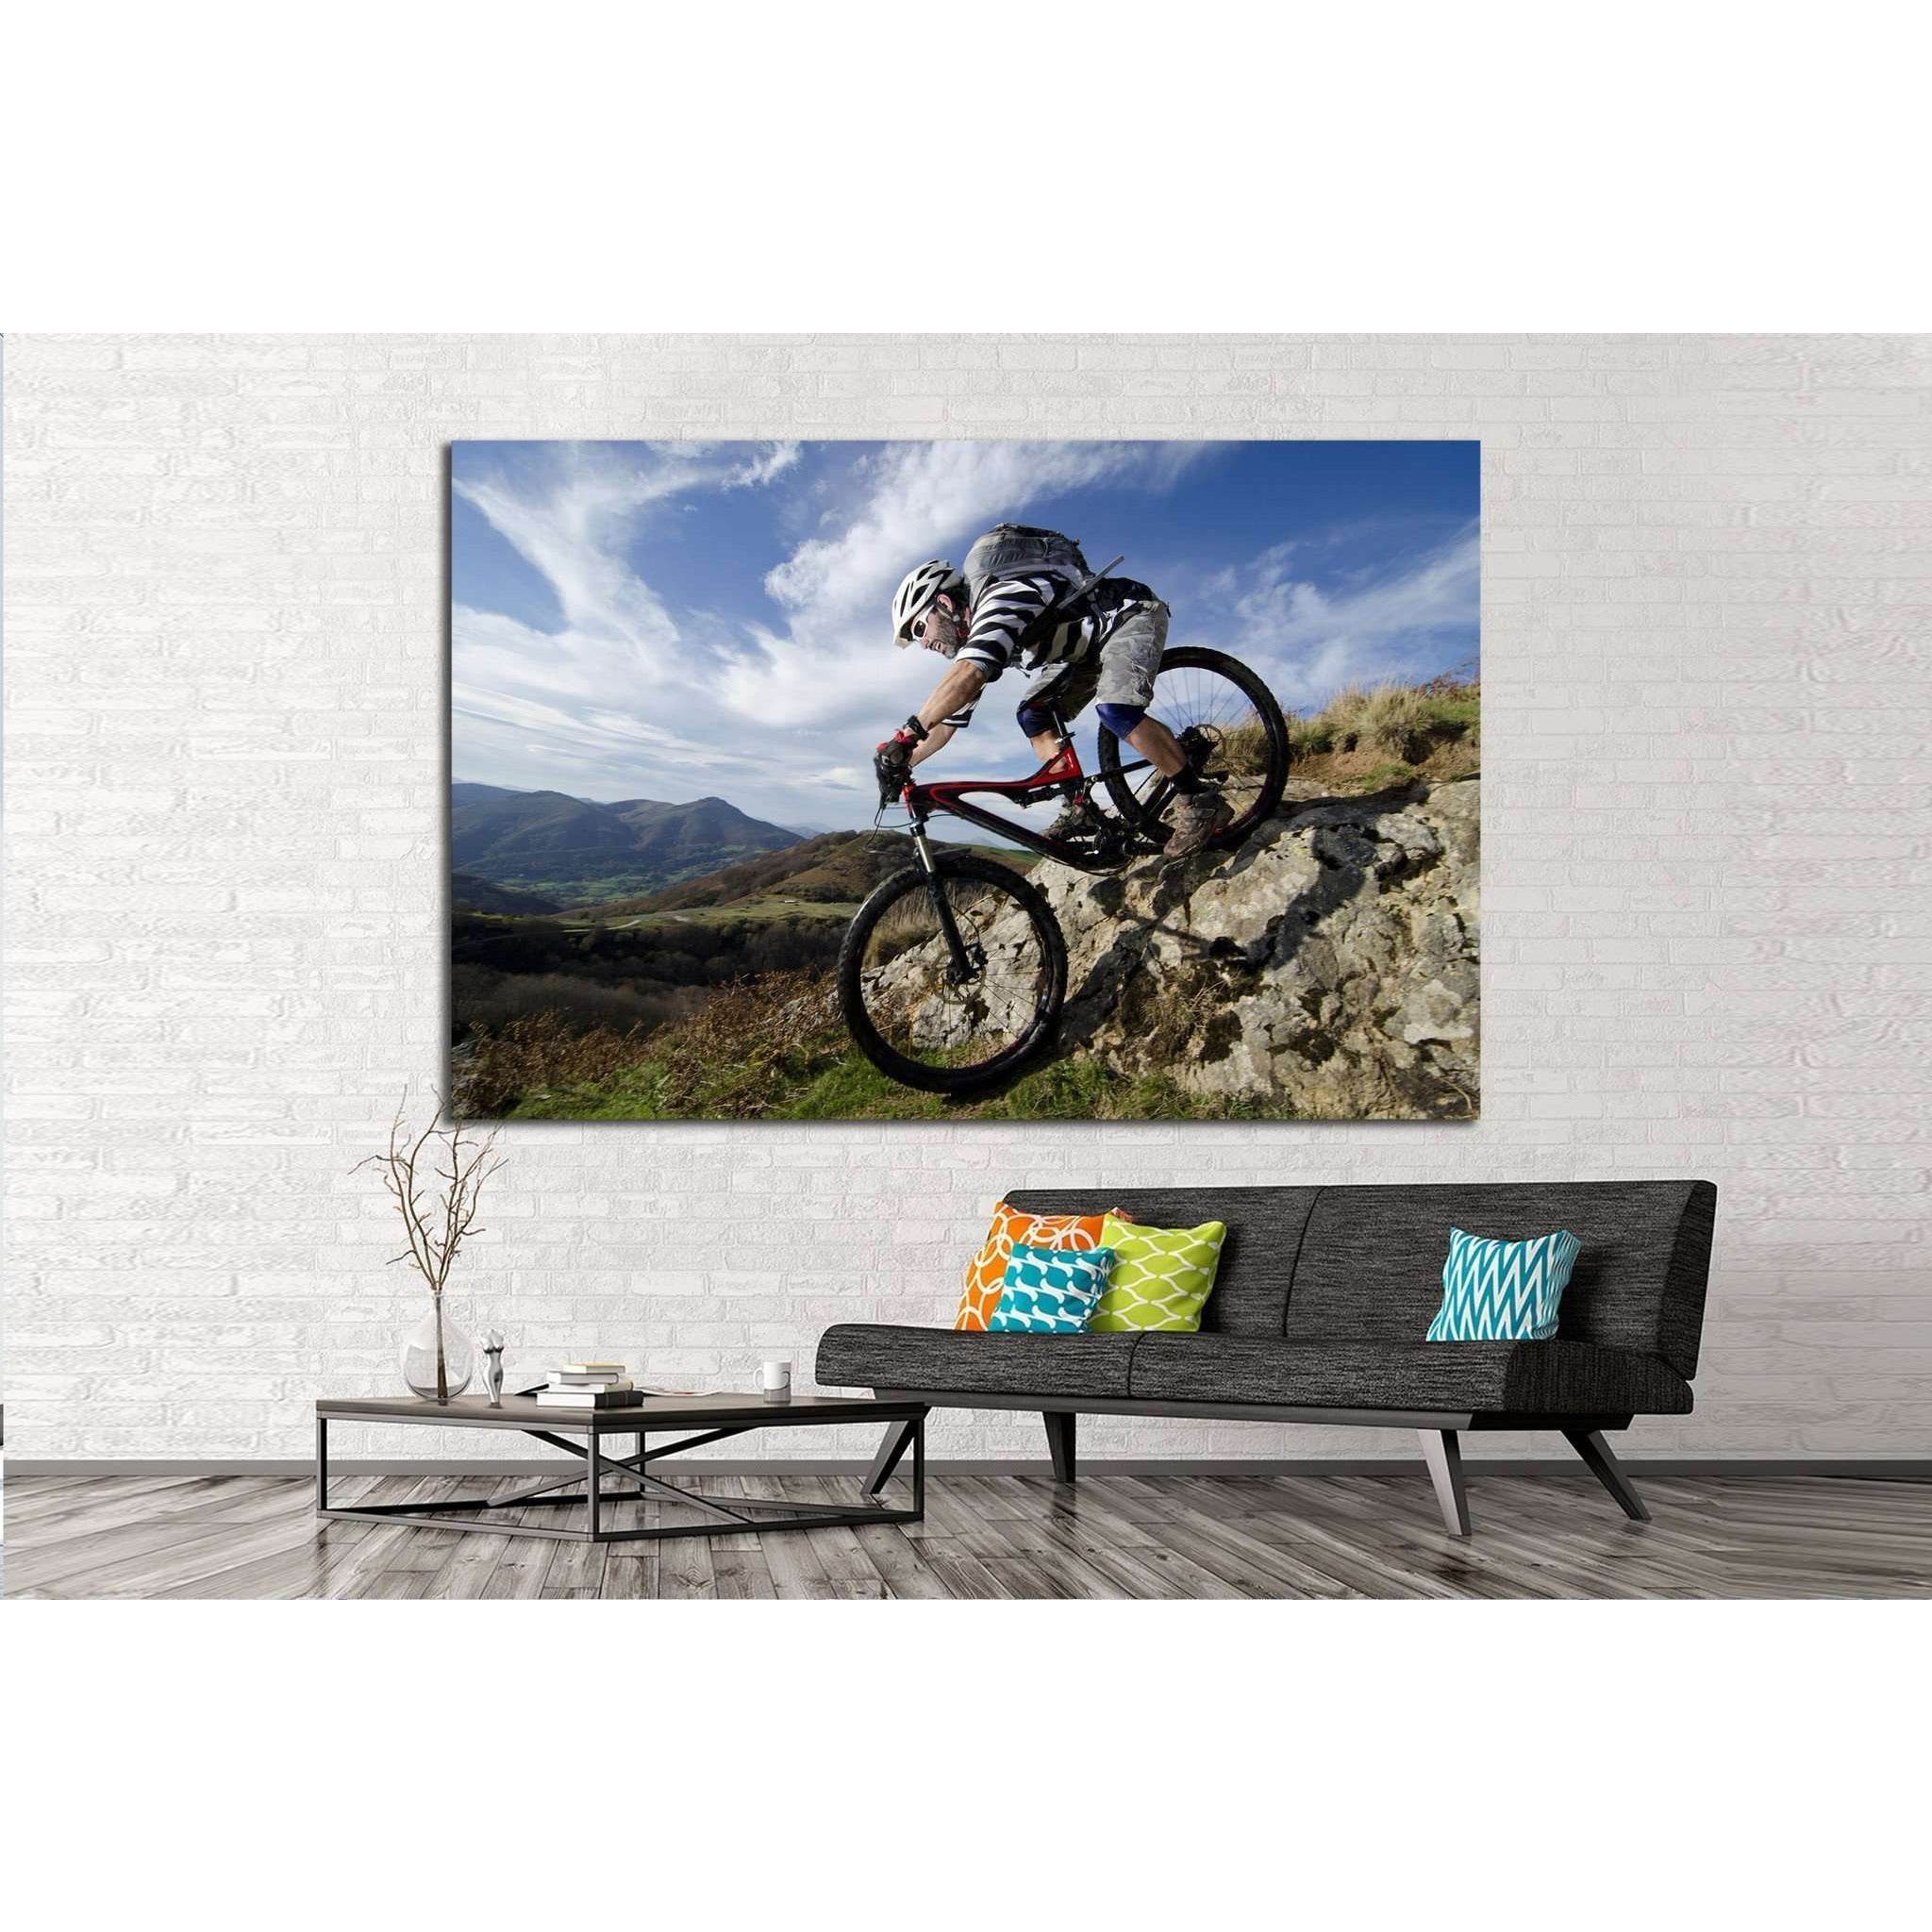 Rider in action at Freestyle Mountain Bike №1374 Ready to Hang Canvas Print